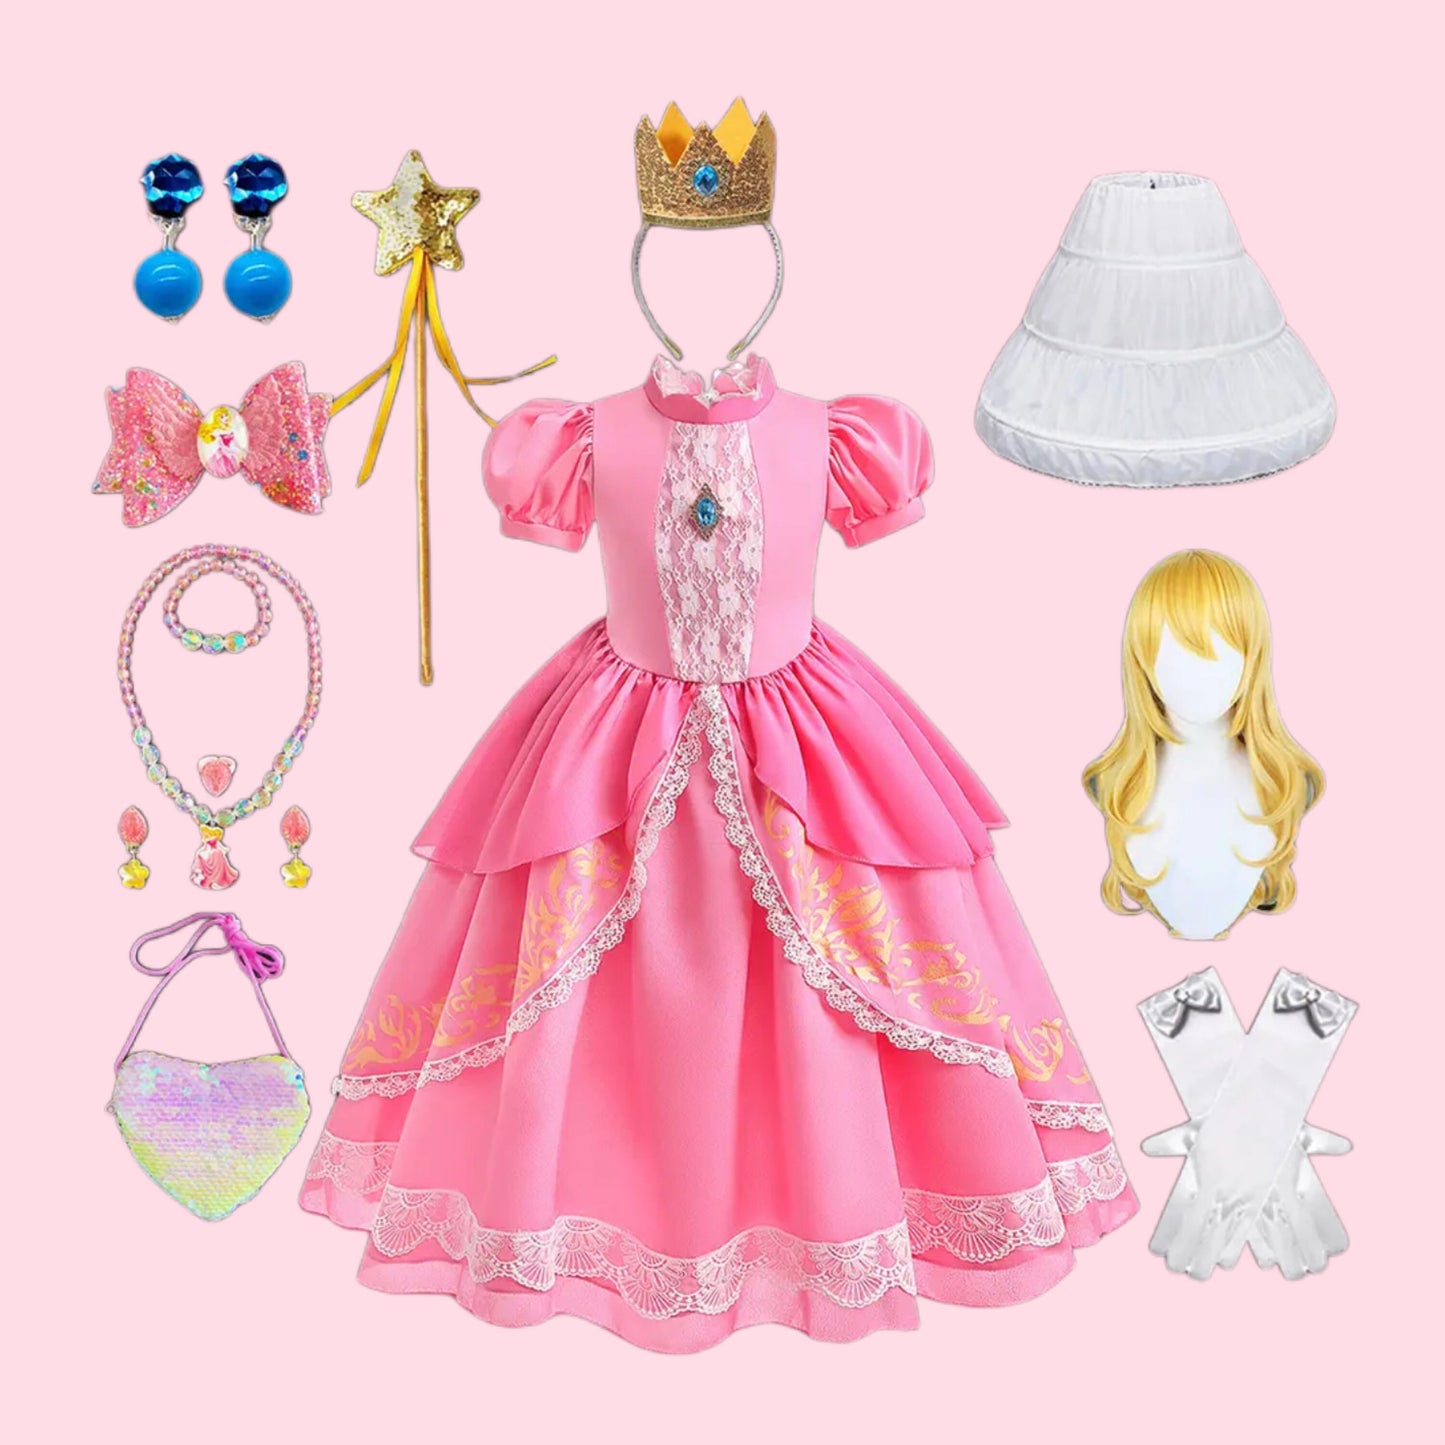 New Princess Peach DELUXE Toddler Girls Dress Costume Halloween Birthday Party